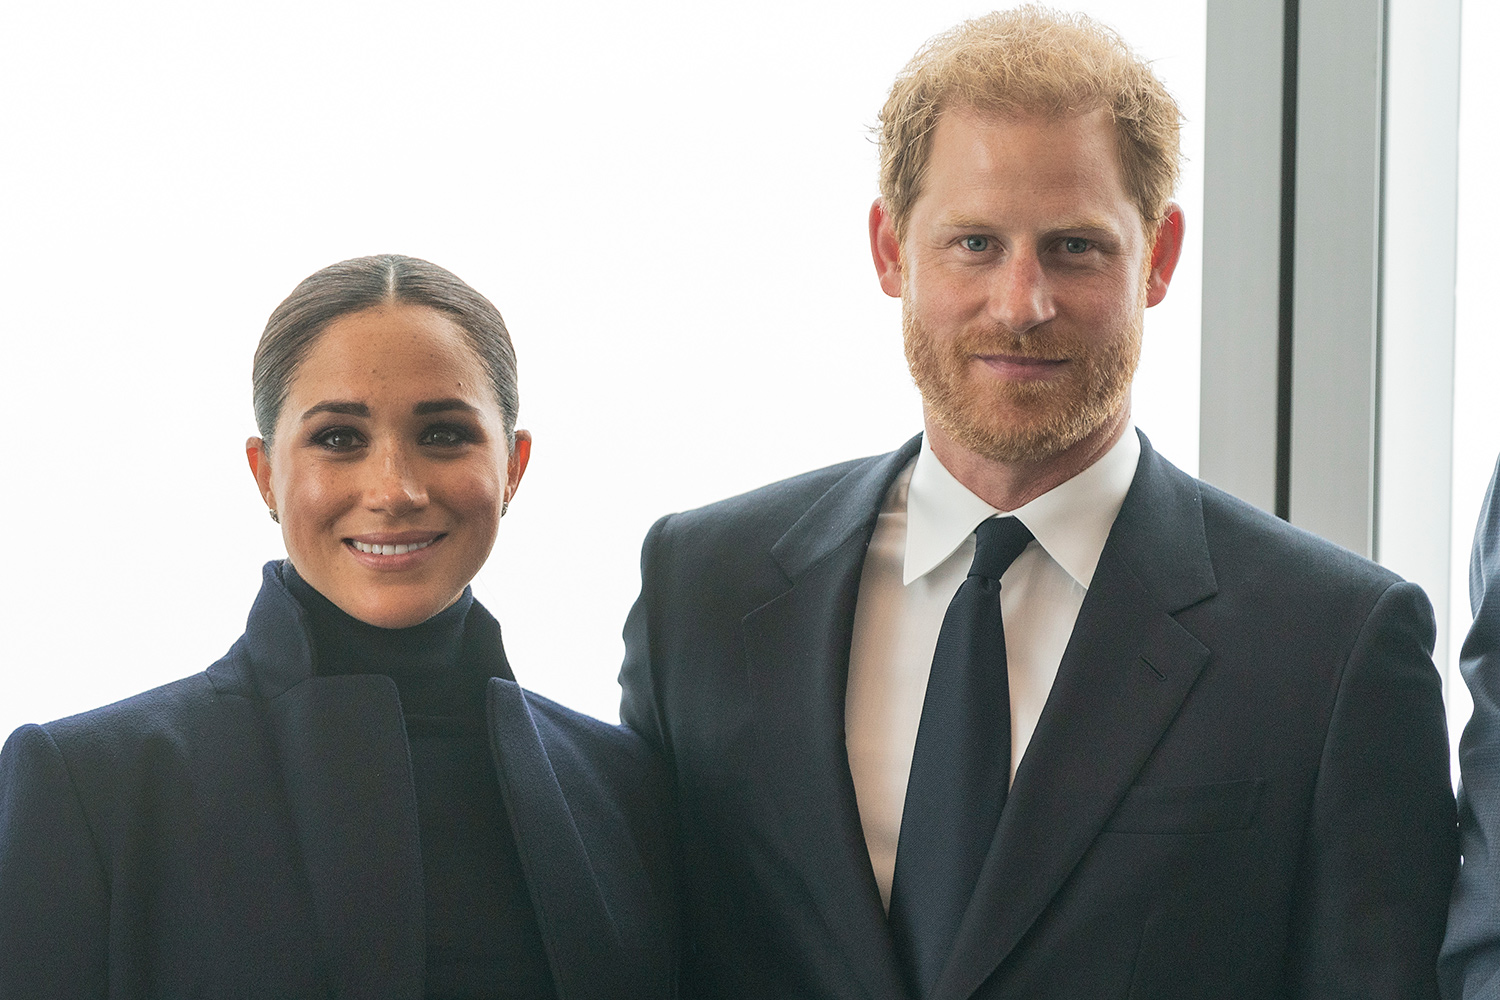 Harry and Meghan visit Queen after public backlash